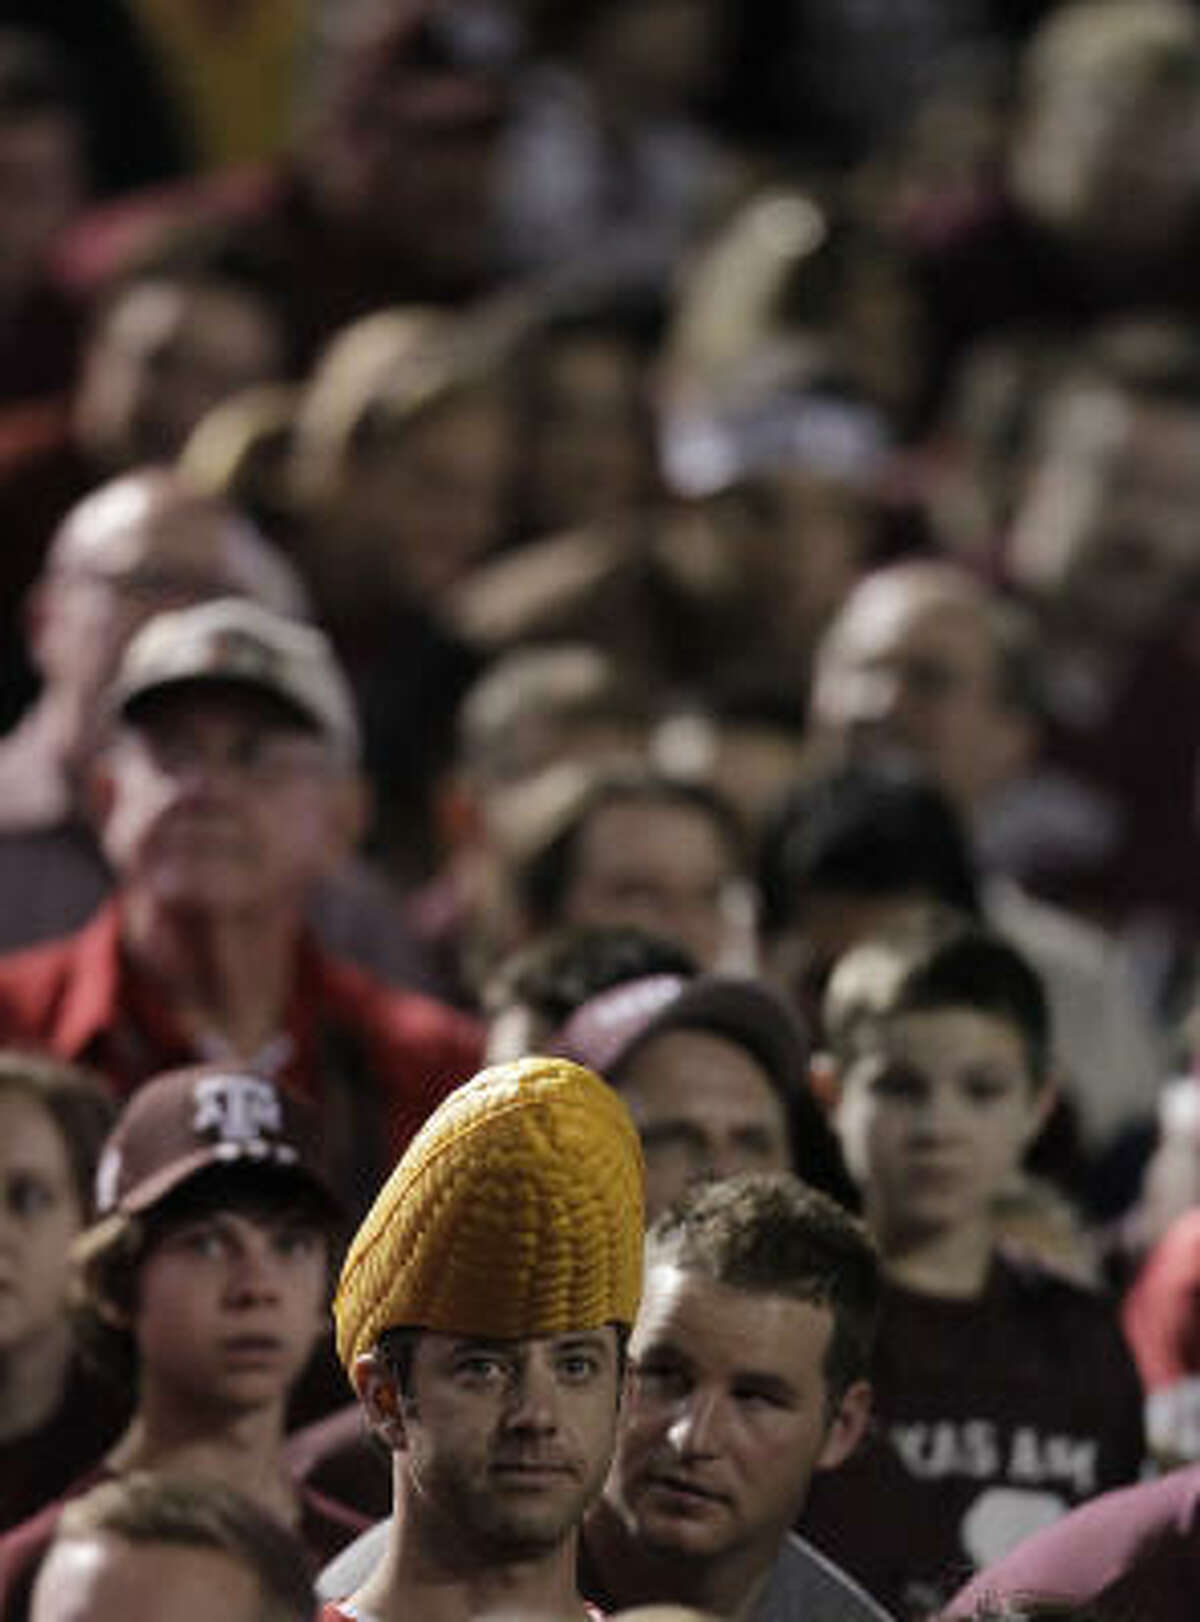 A lone Nebraska fan sits in a sea of A&M fans before the start of the game.